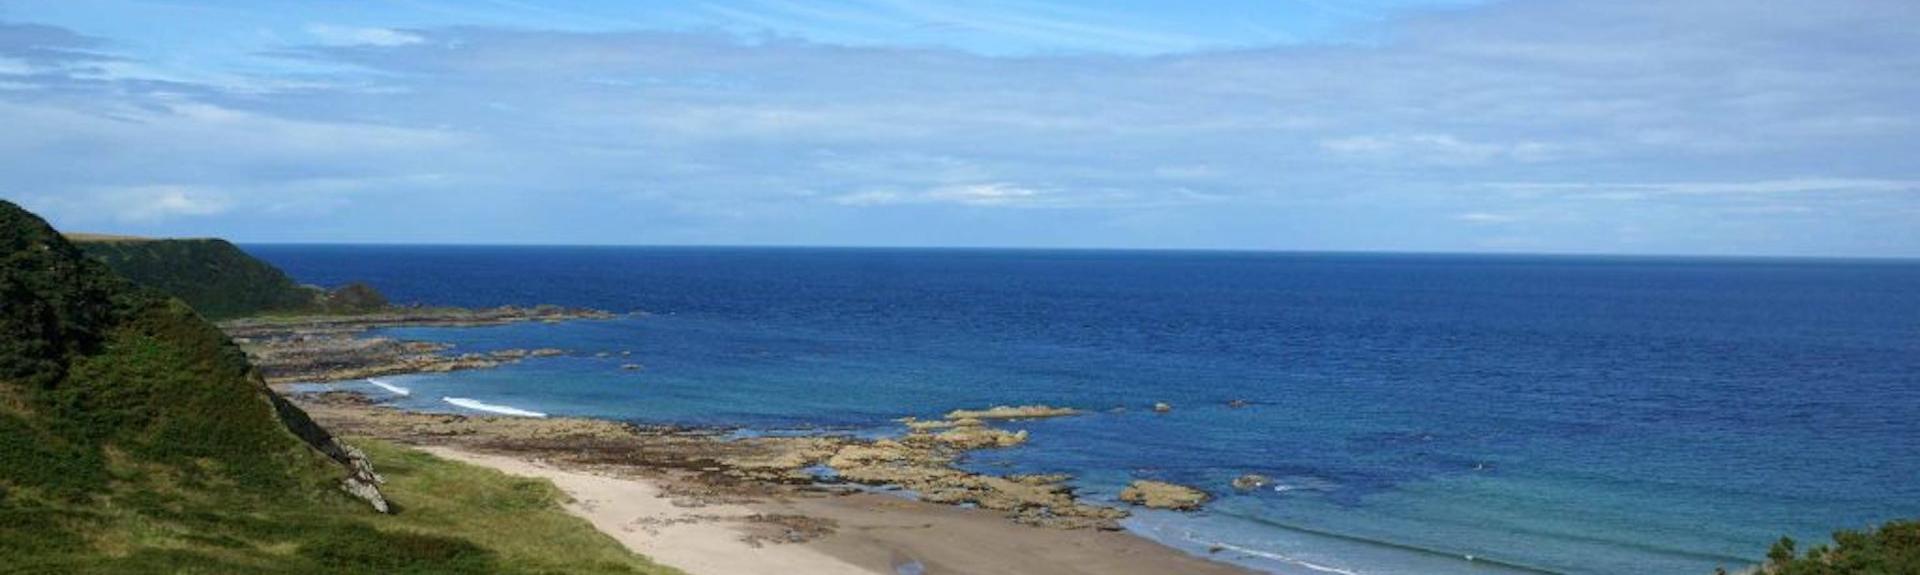 View of low grassy hills sloping down to a small beach in Banff, Aberdeenshire